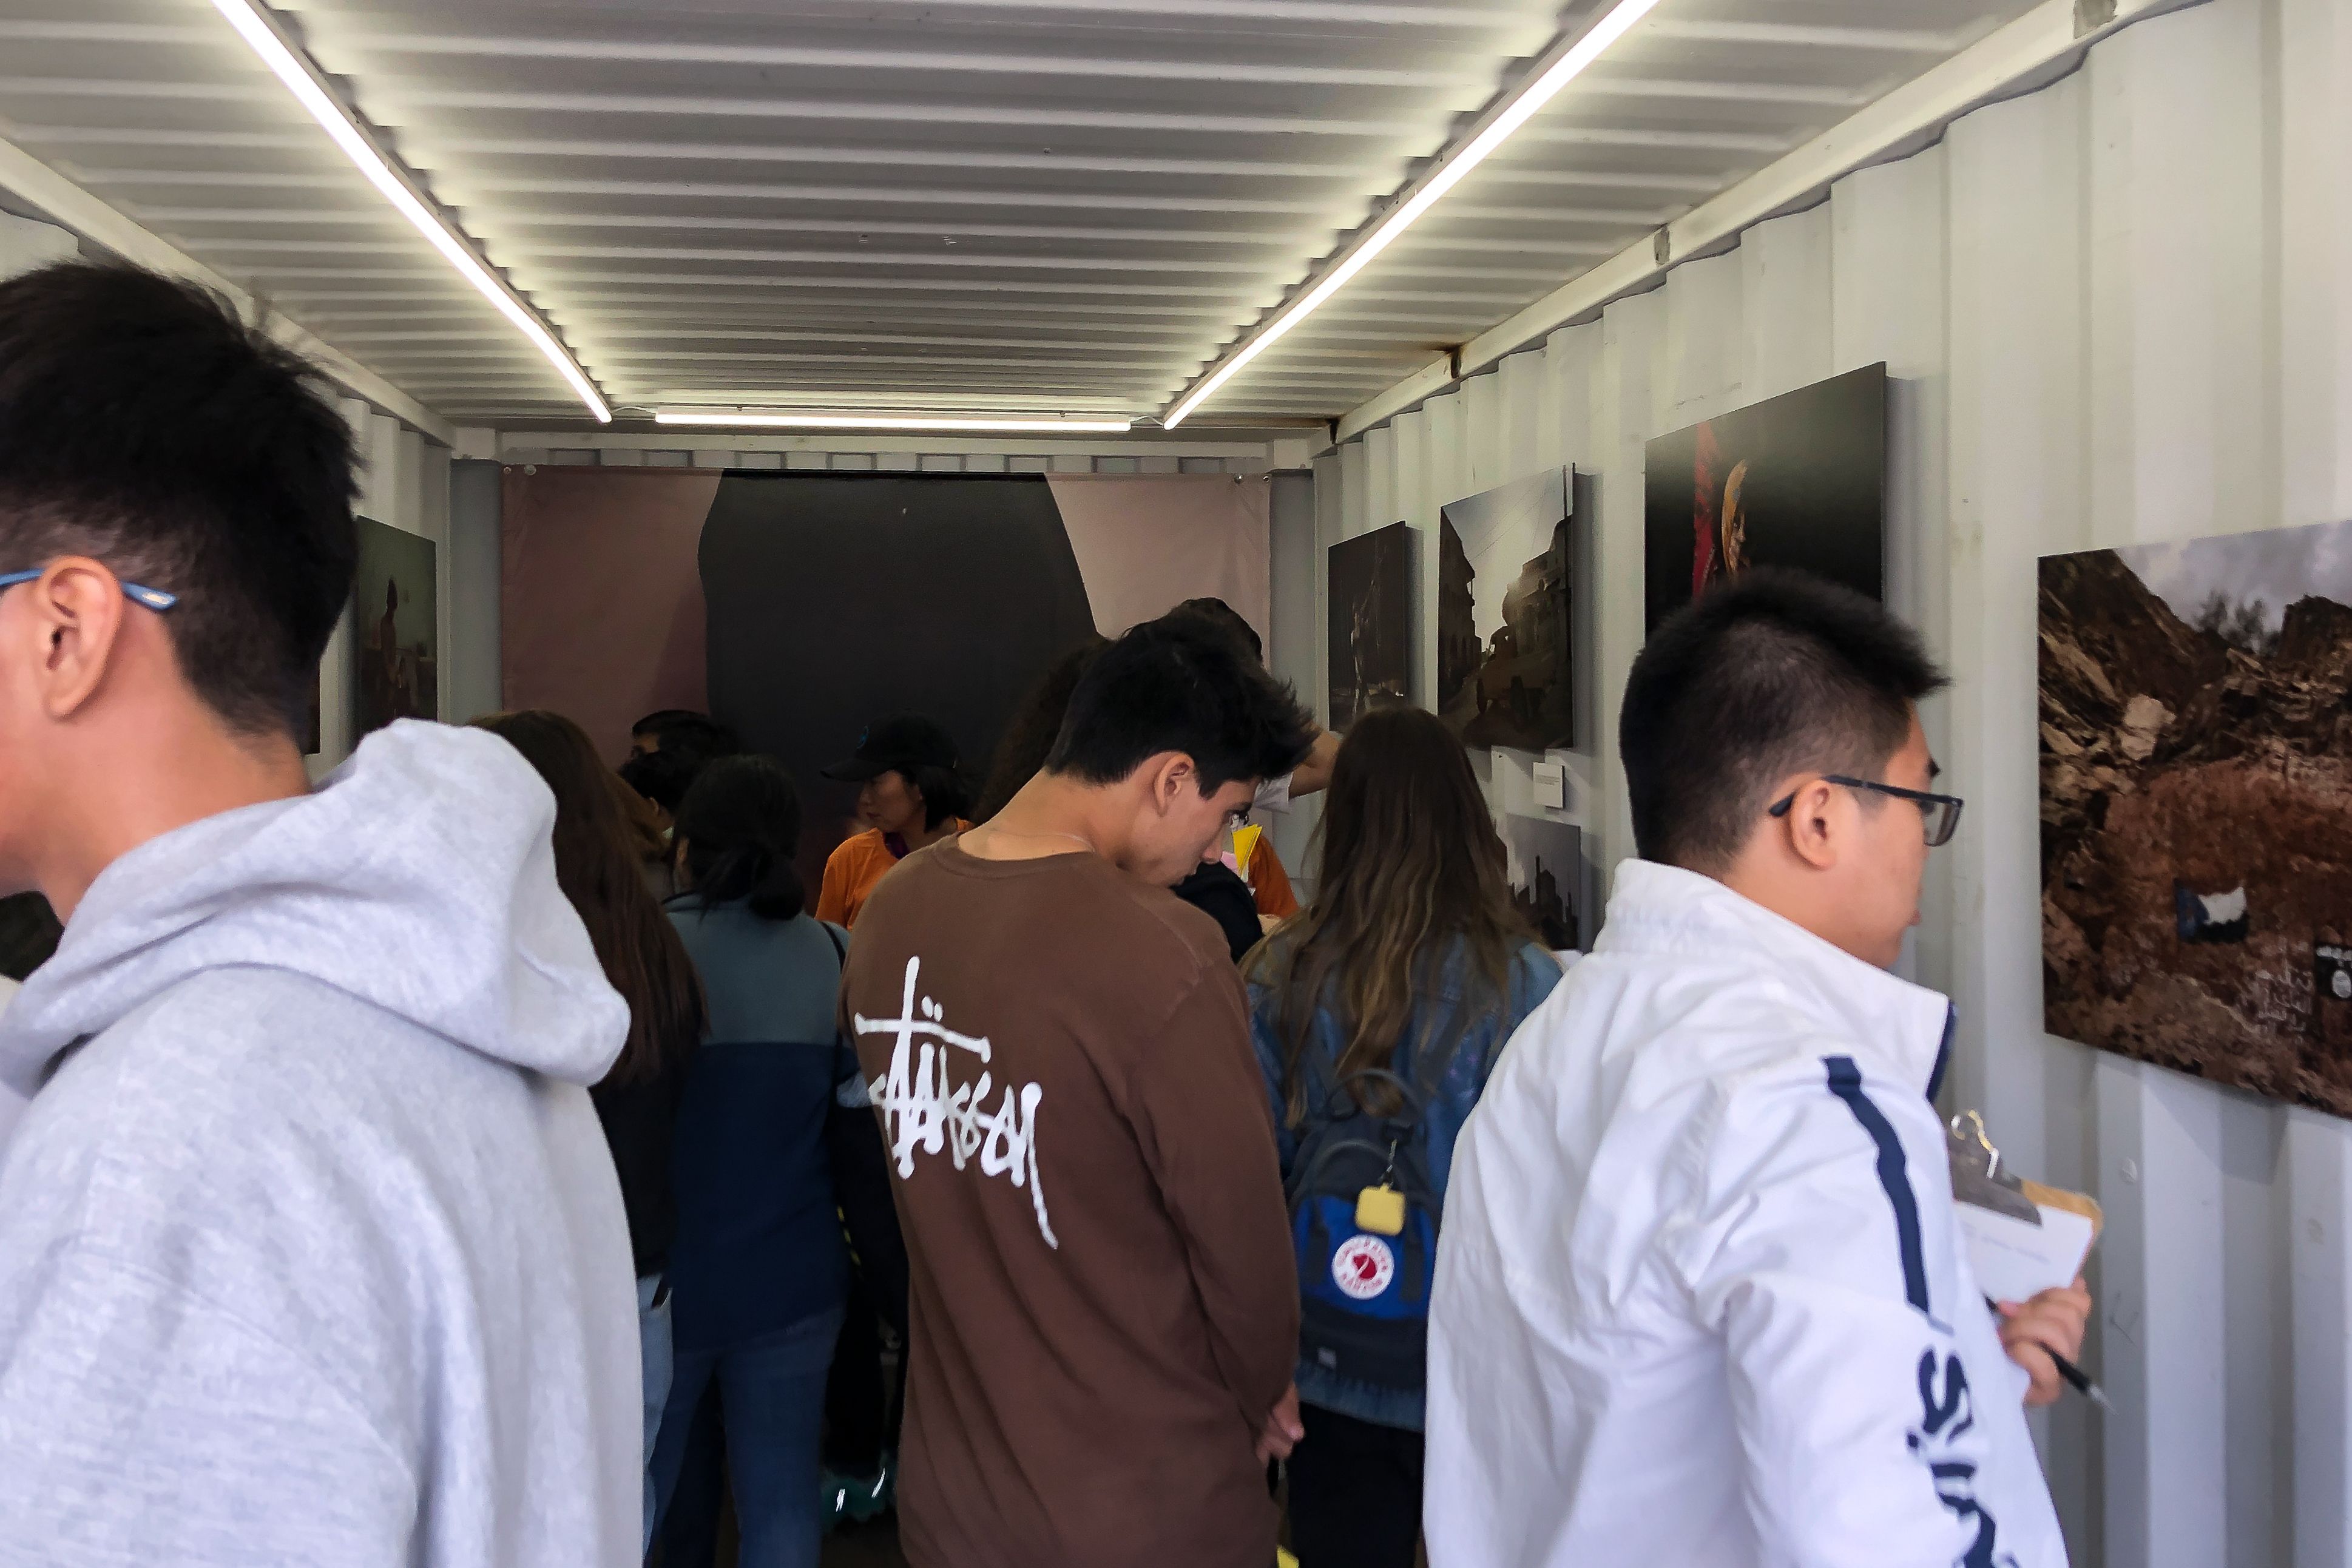 Students explore and discuss Nariman el-Mofty's photos at Photoville's Education Day. Image by Claire Seaton. United States, 2019.